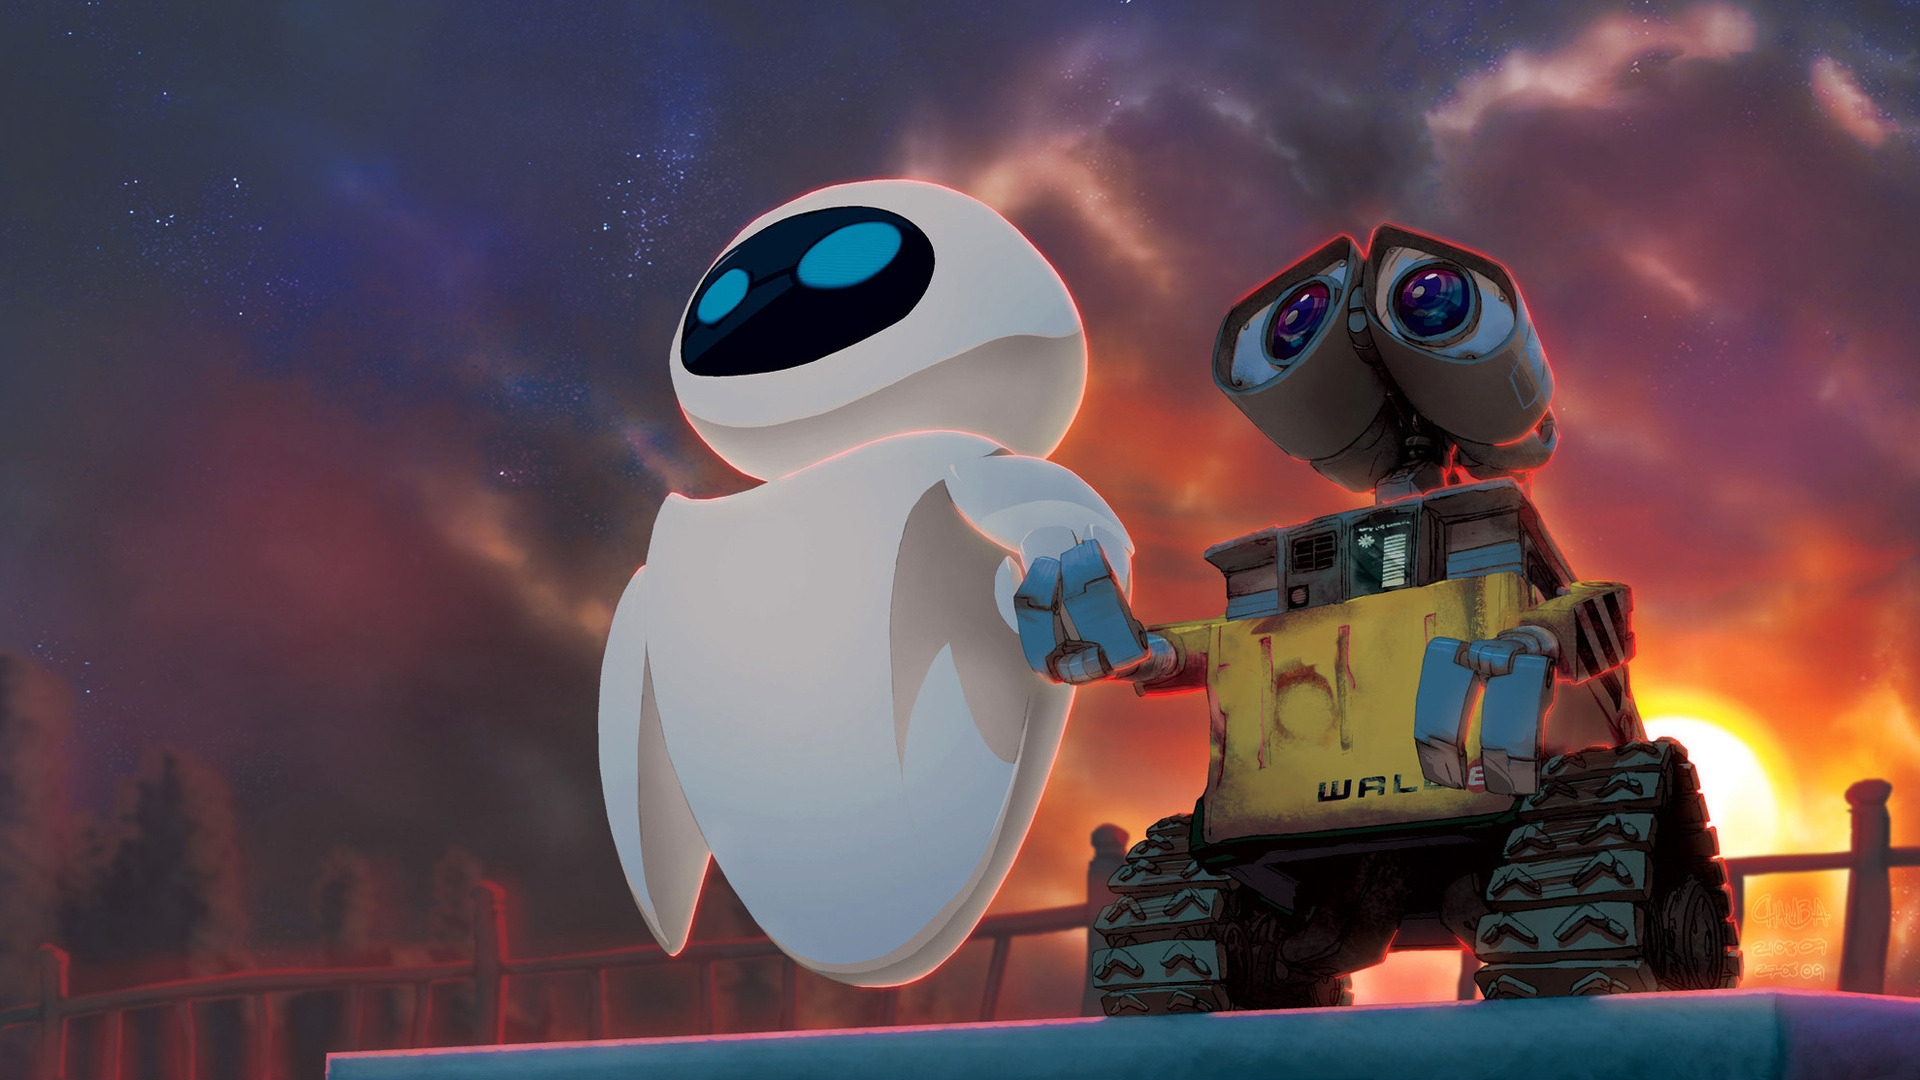 Walle Cartooned for 1920 x 1080 HDTV 1080p resolution